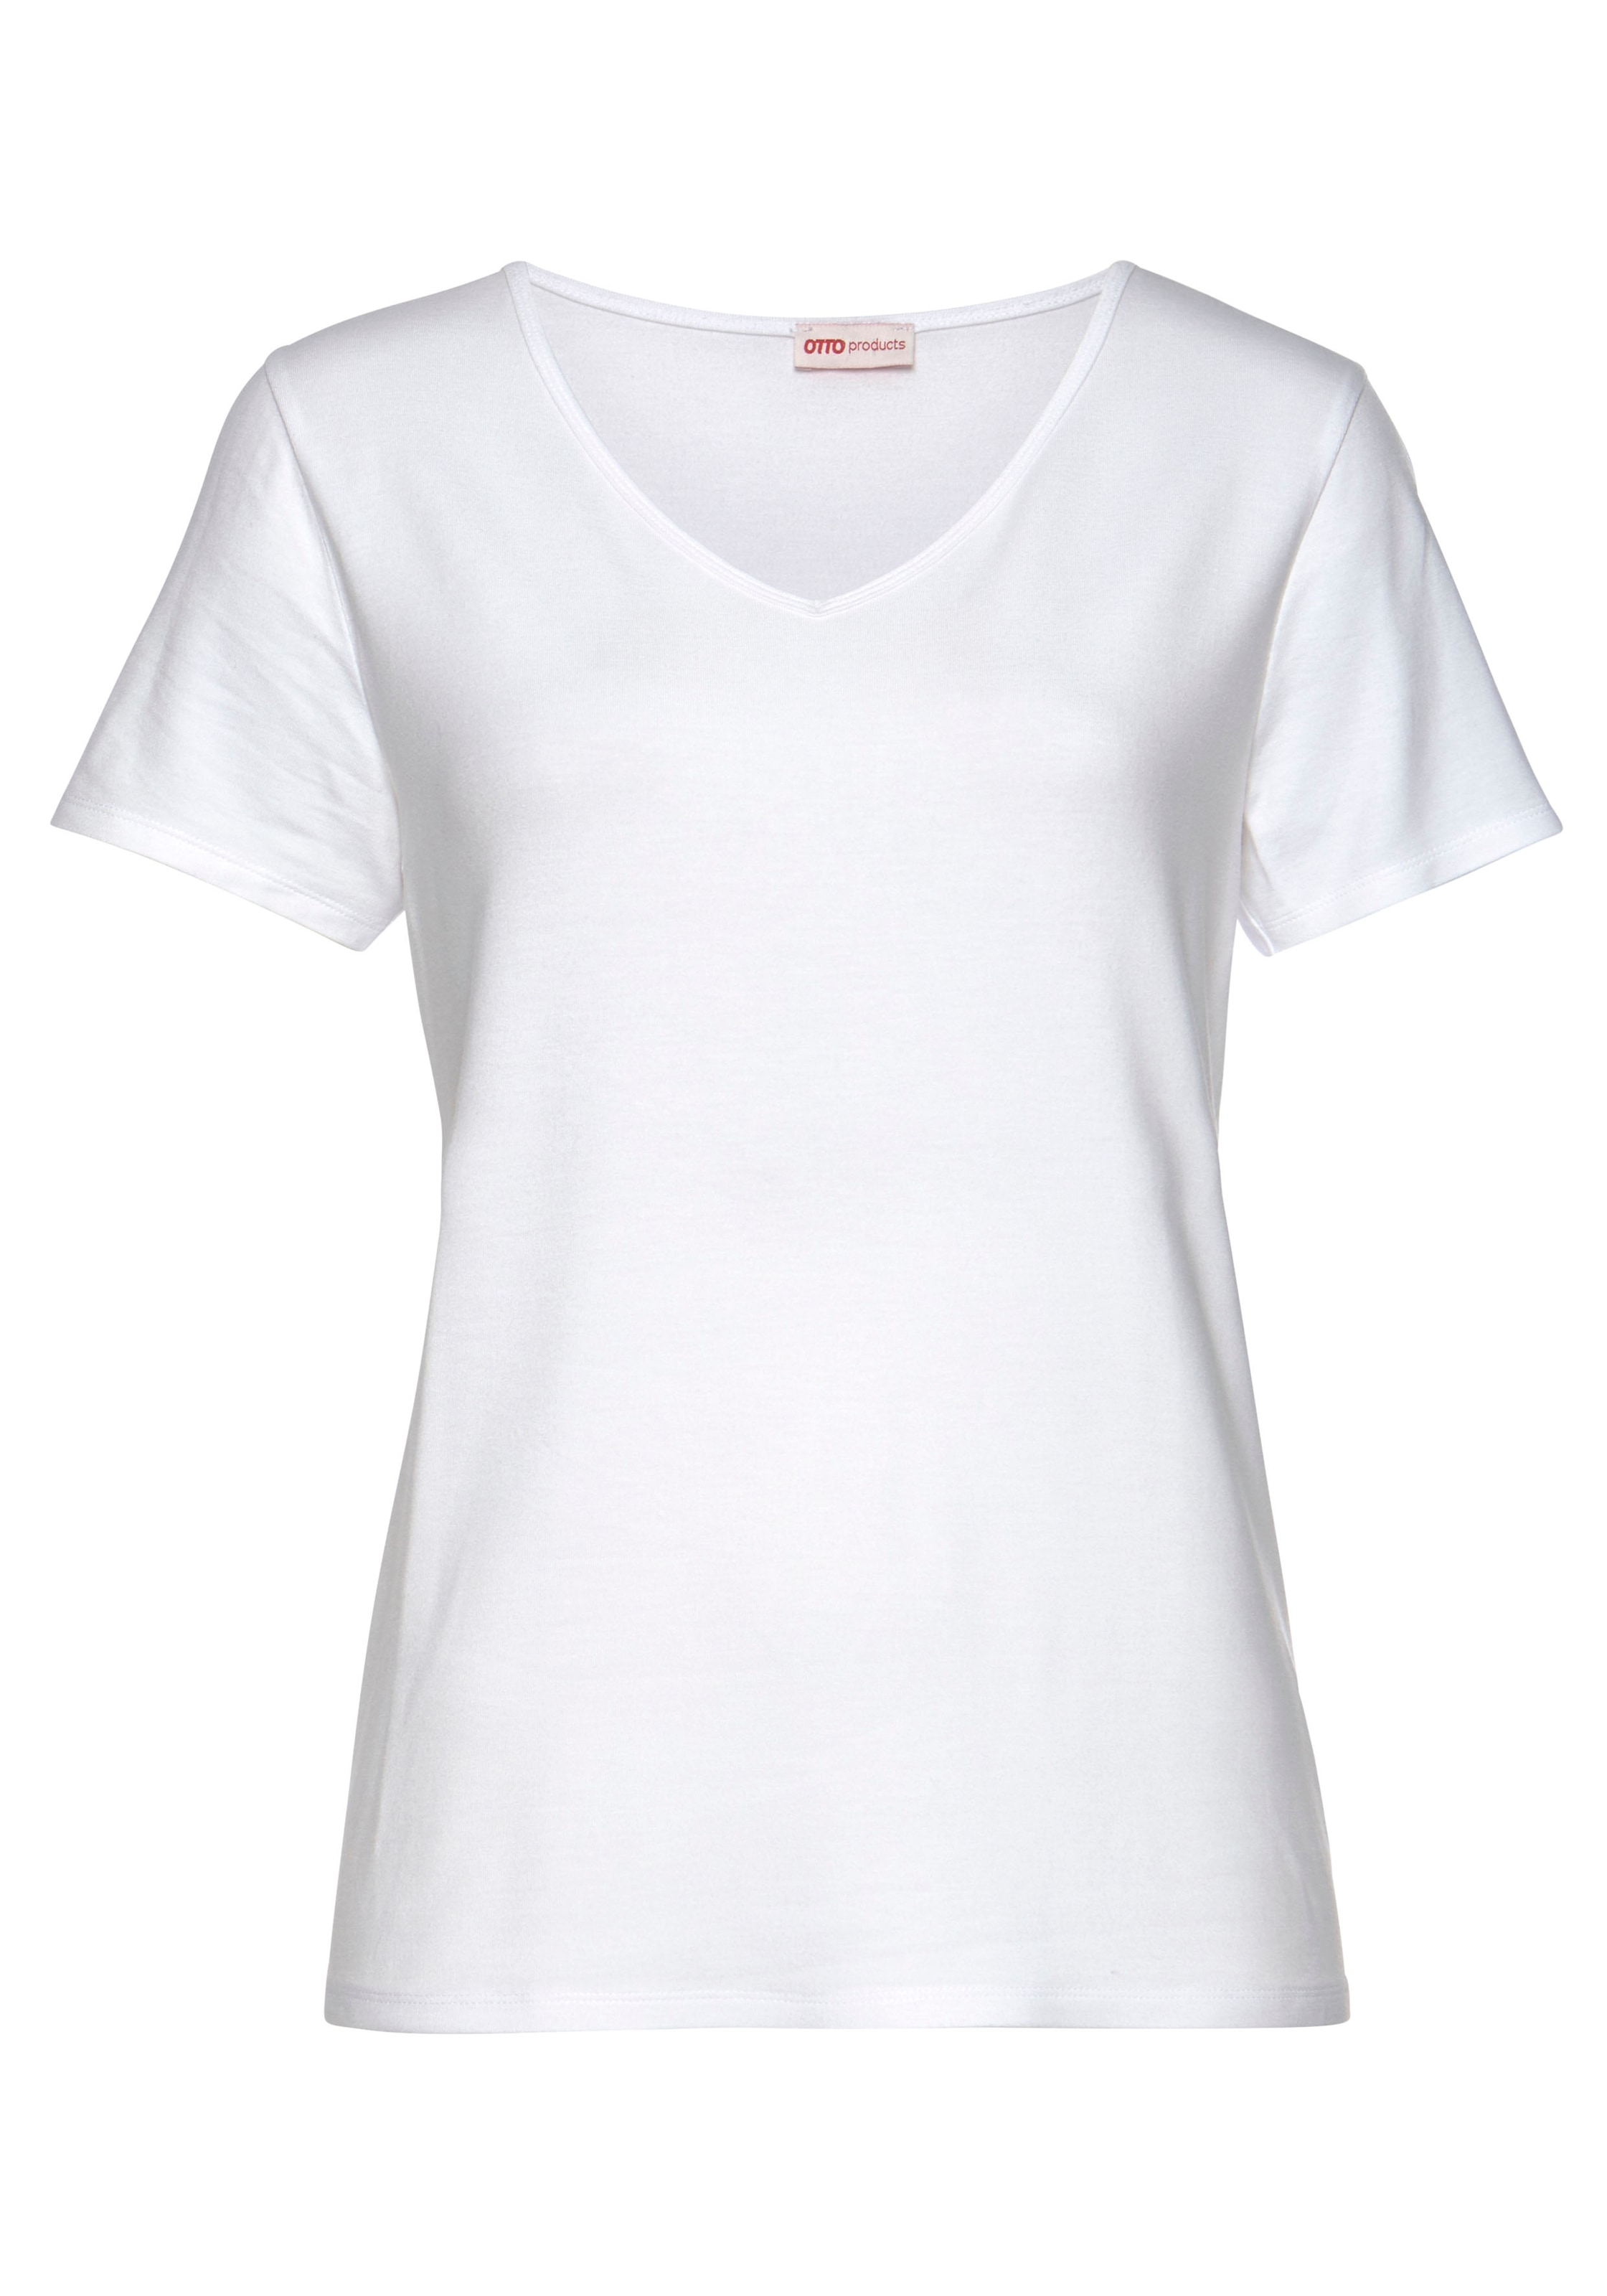 OTTO products V-Shirt